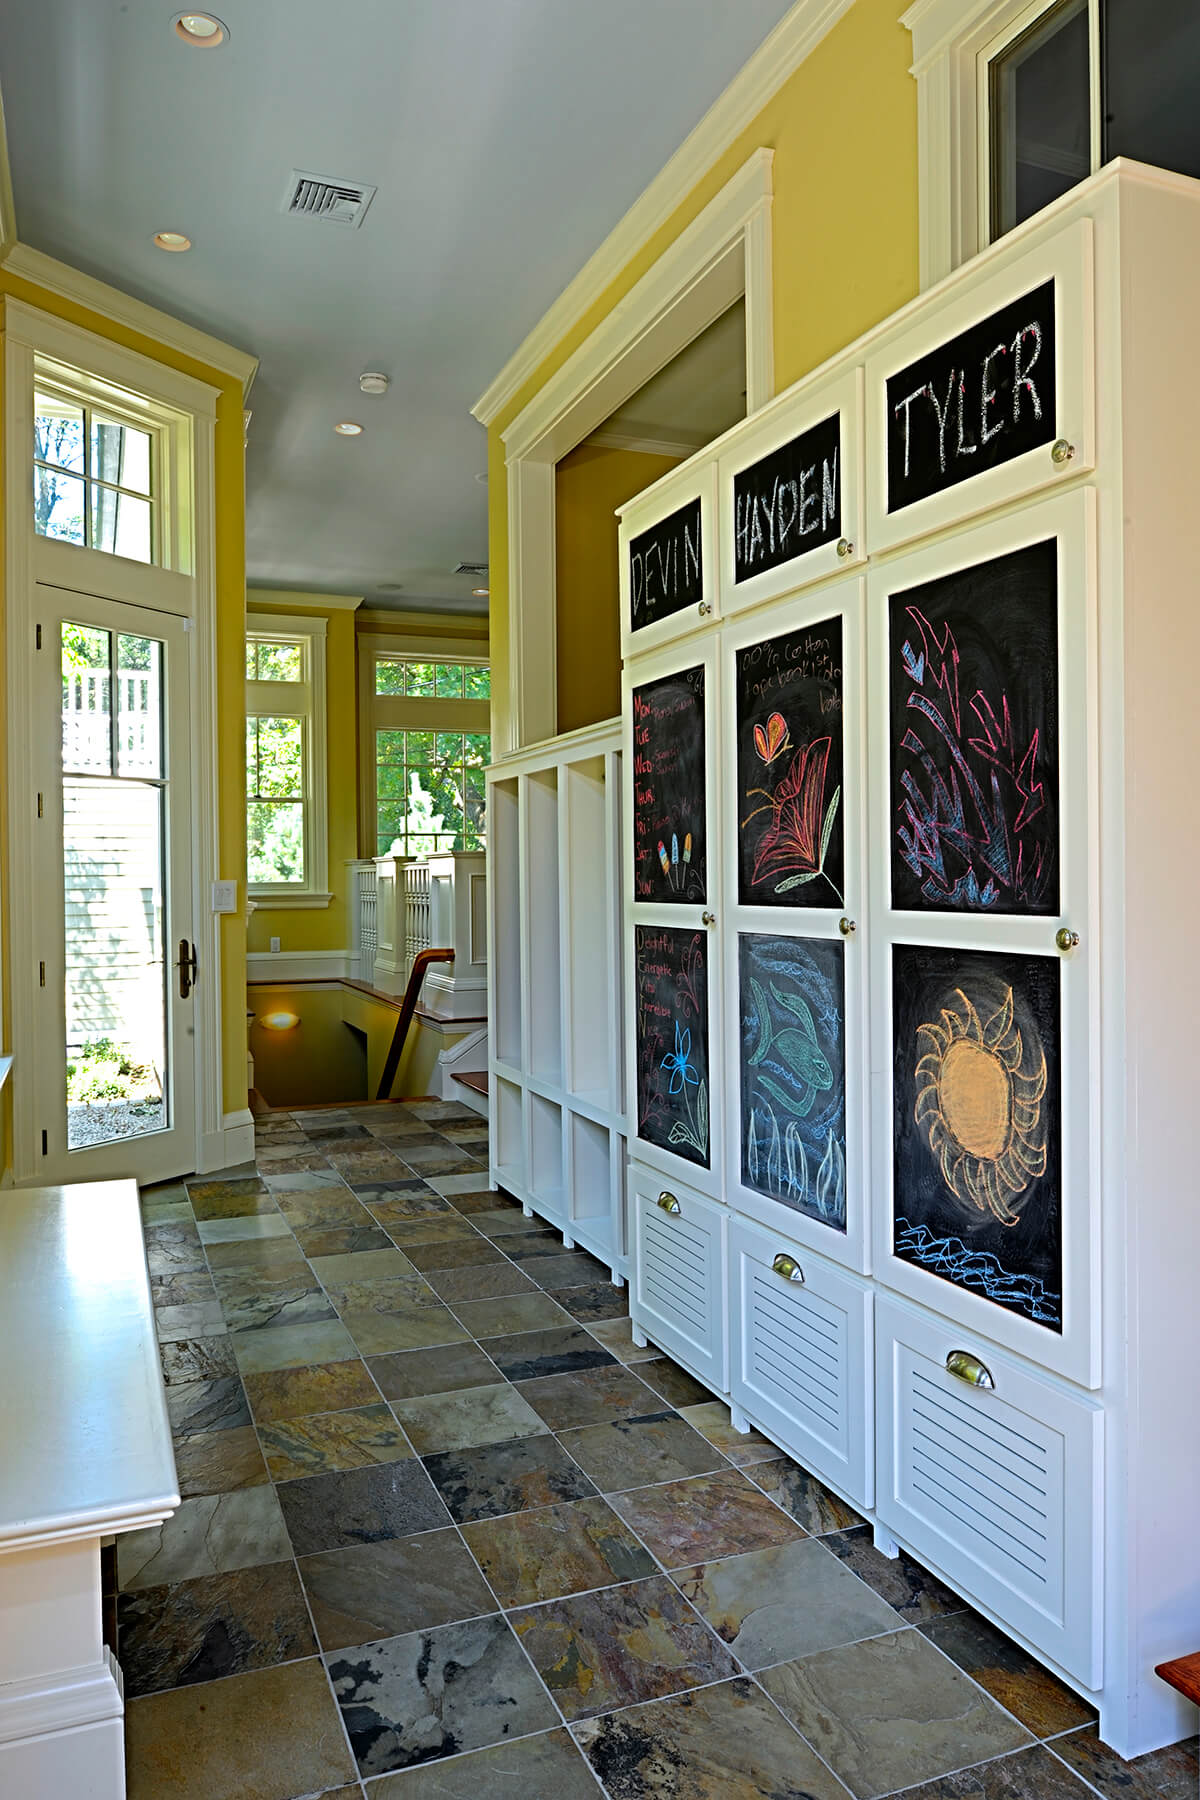 Tile Floor And Personalized Closets